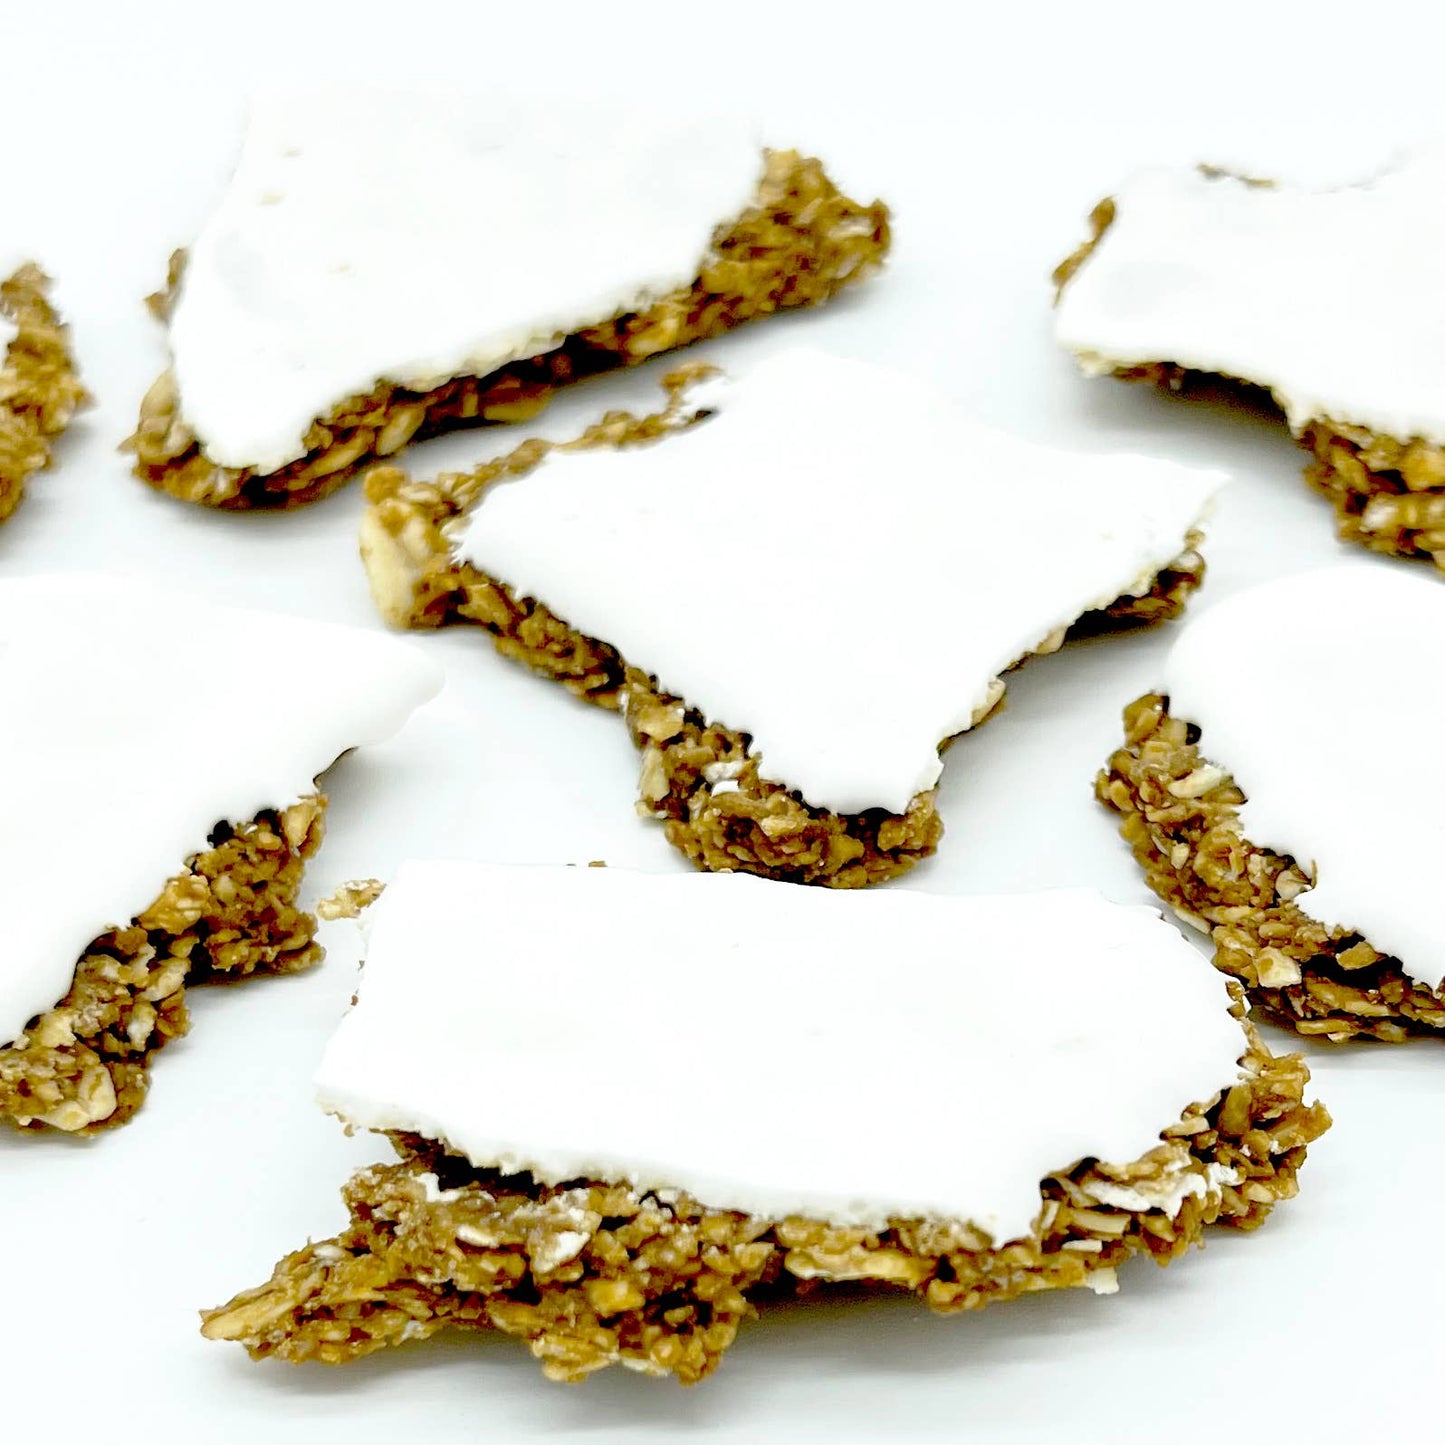 Frosted Chewy Oat Cake Brittle, 10 oz. pkg.